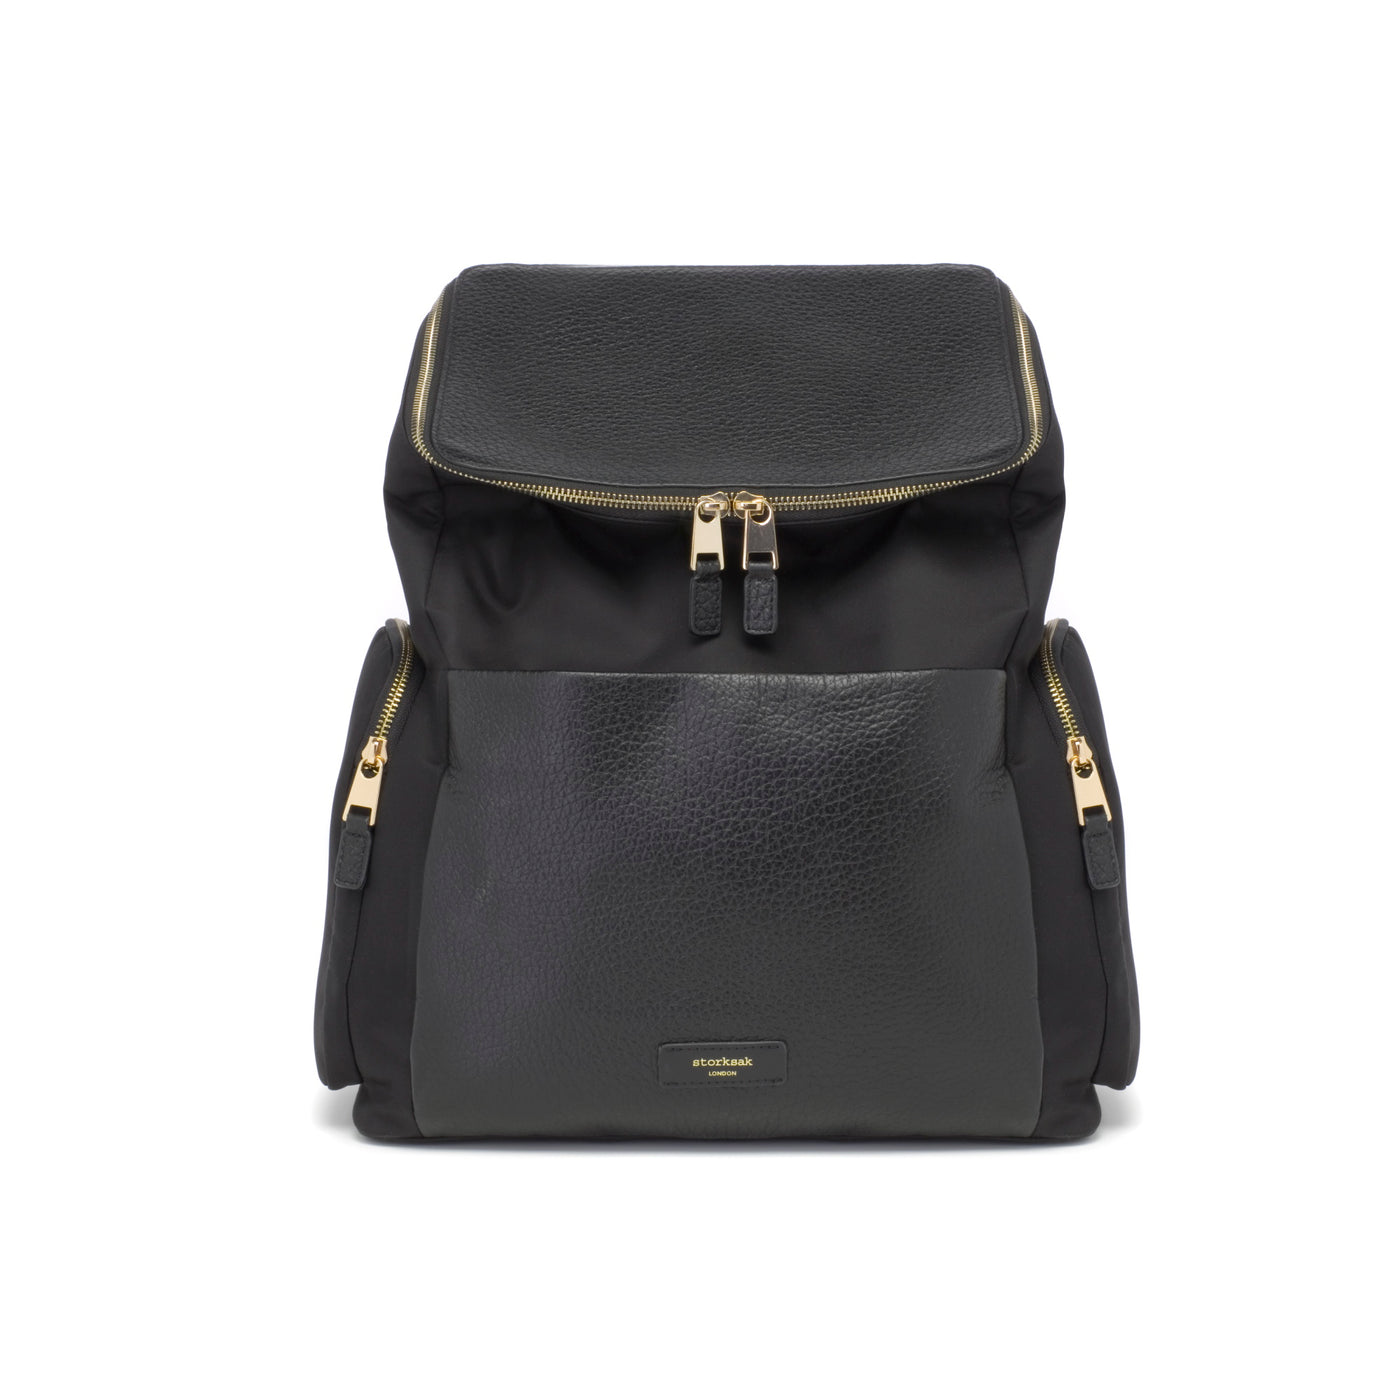 Alyssa Leather Black Nappy Bag with Gold Hardware